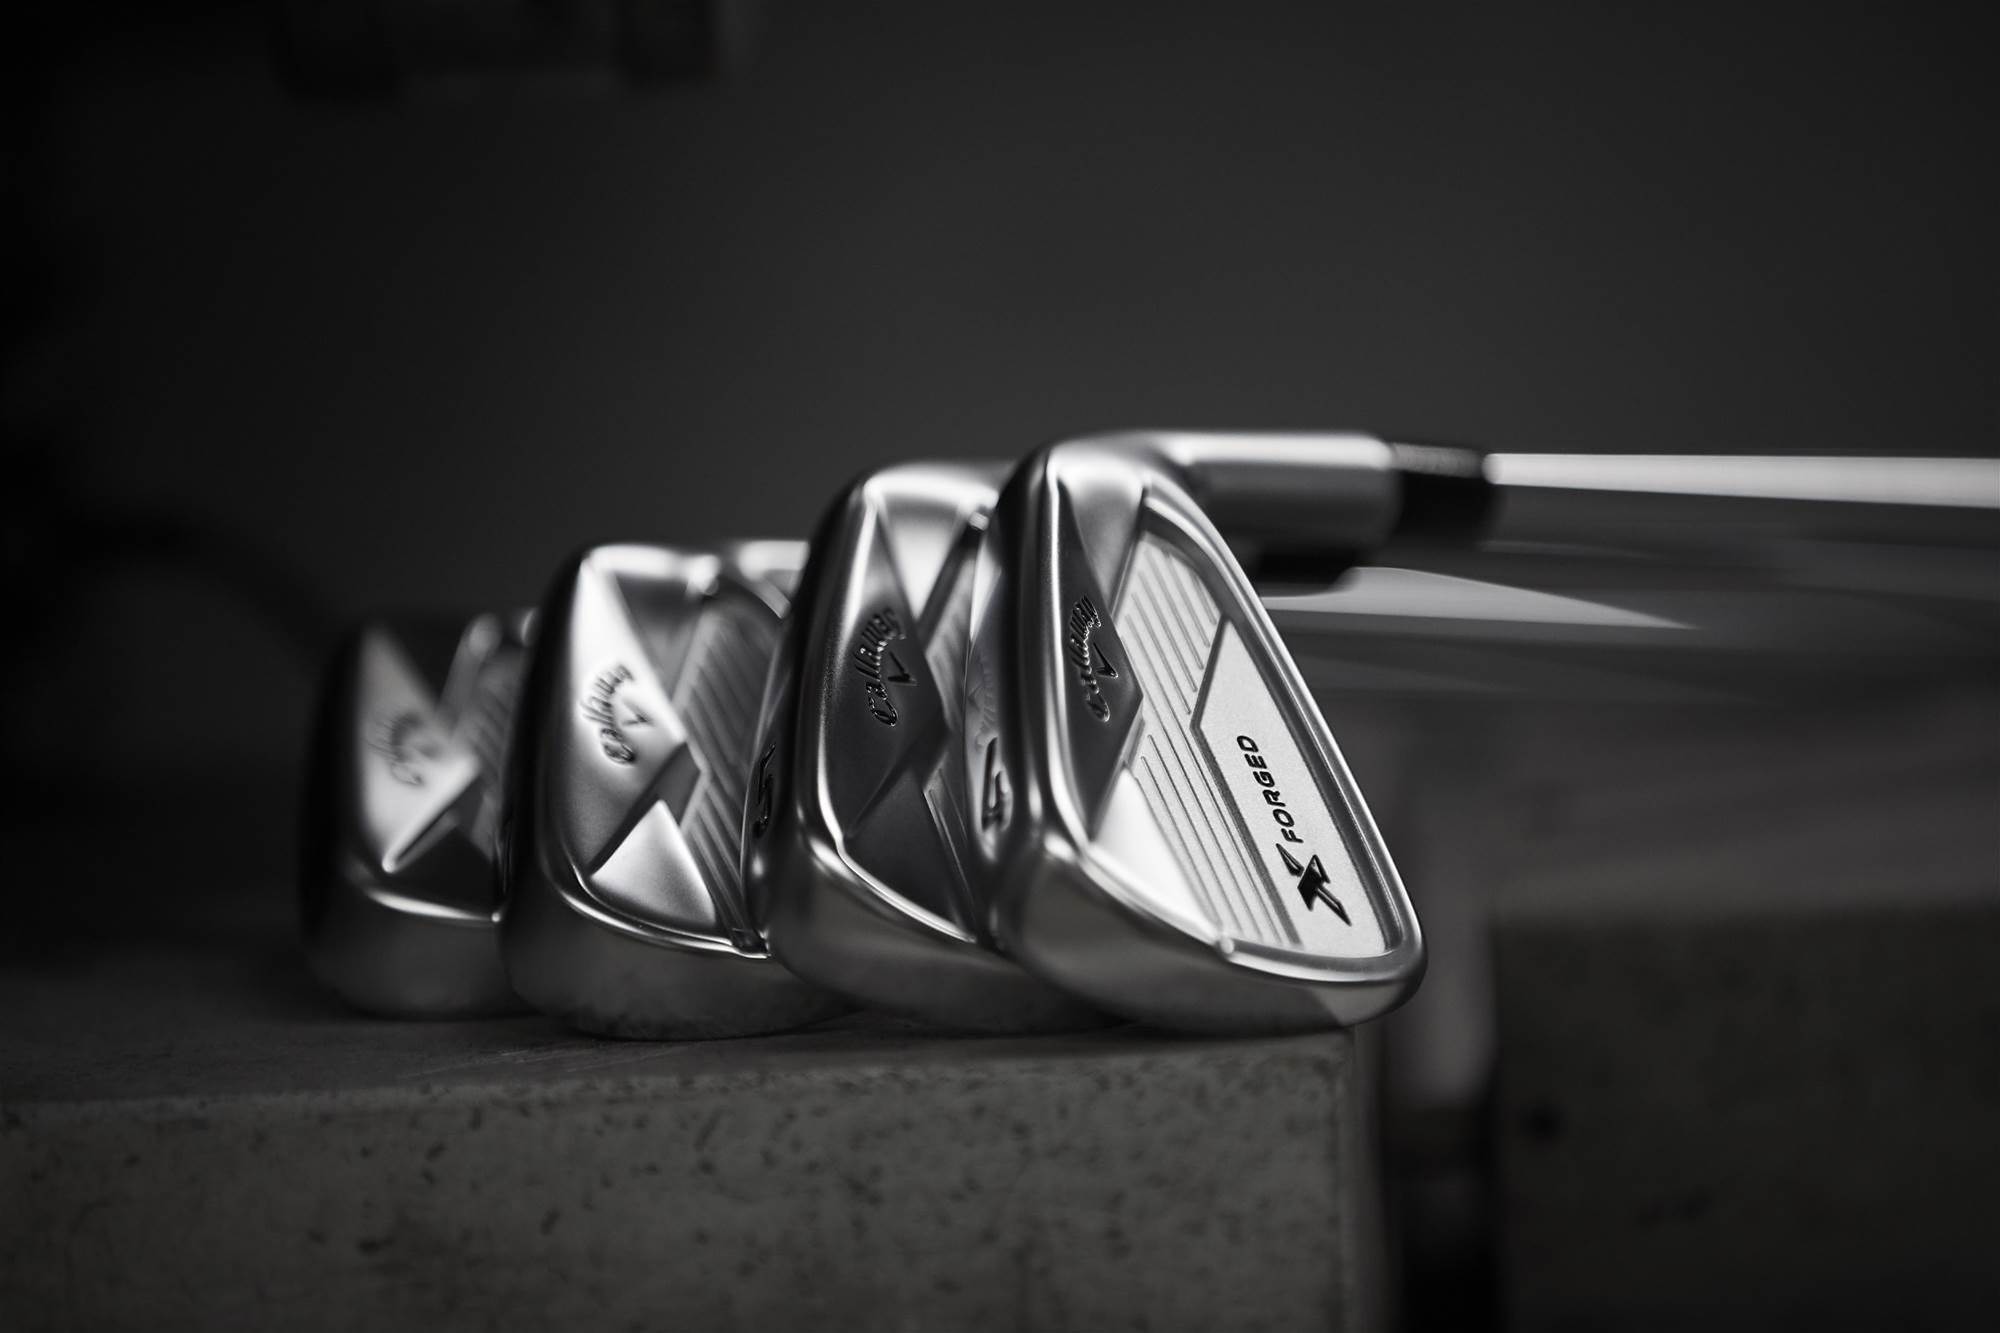 New Callaway irons coming our way Golf Australia Magazine